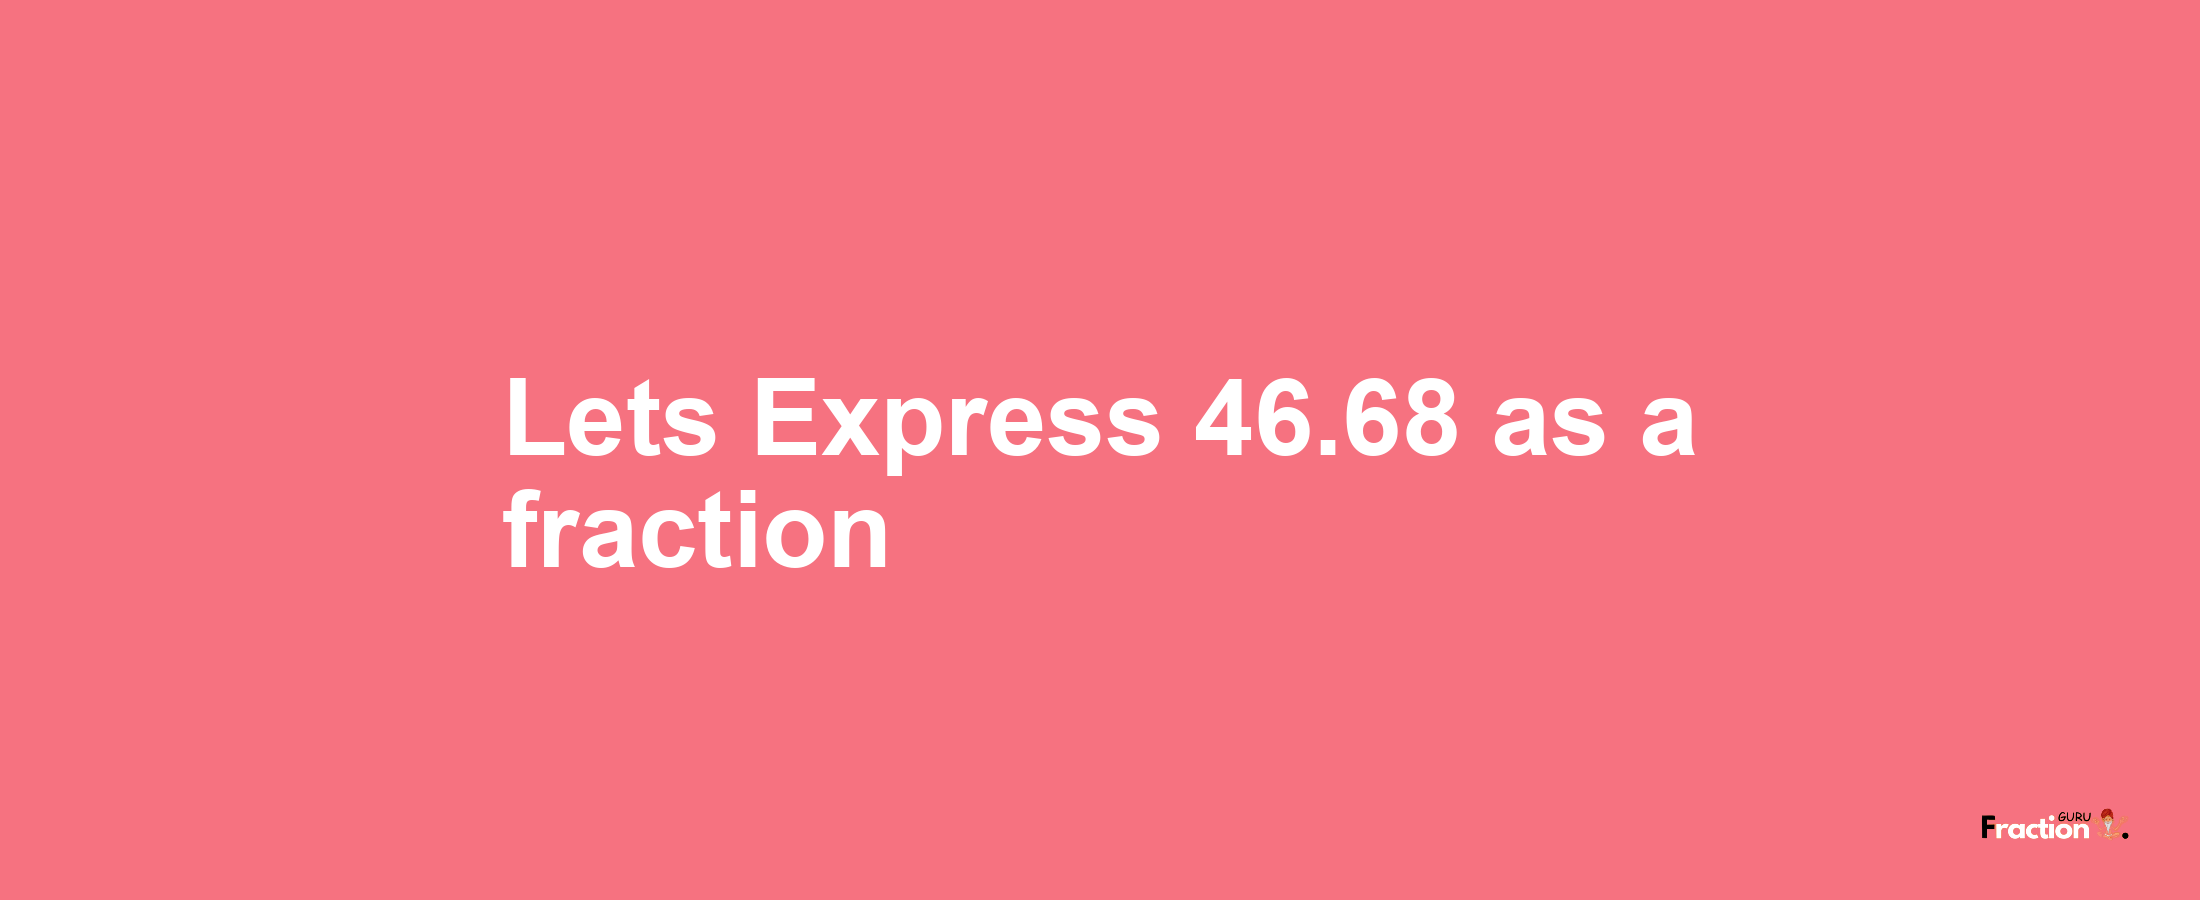 Lets Express 46.68 as afraction